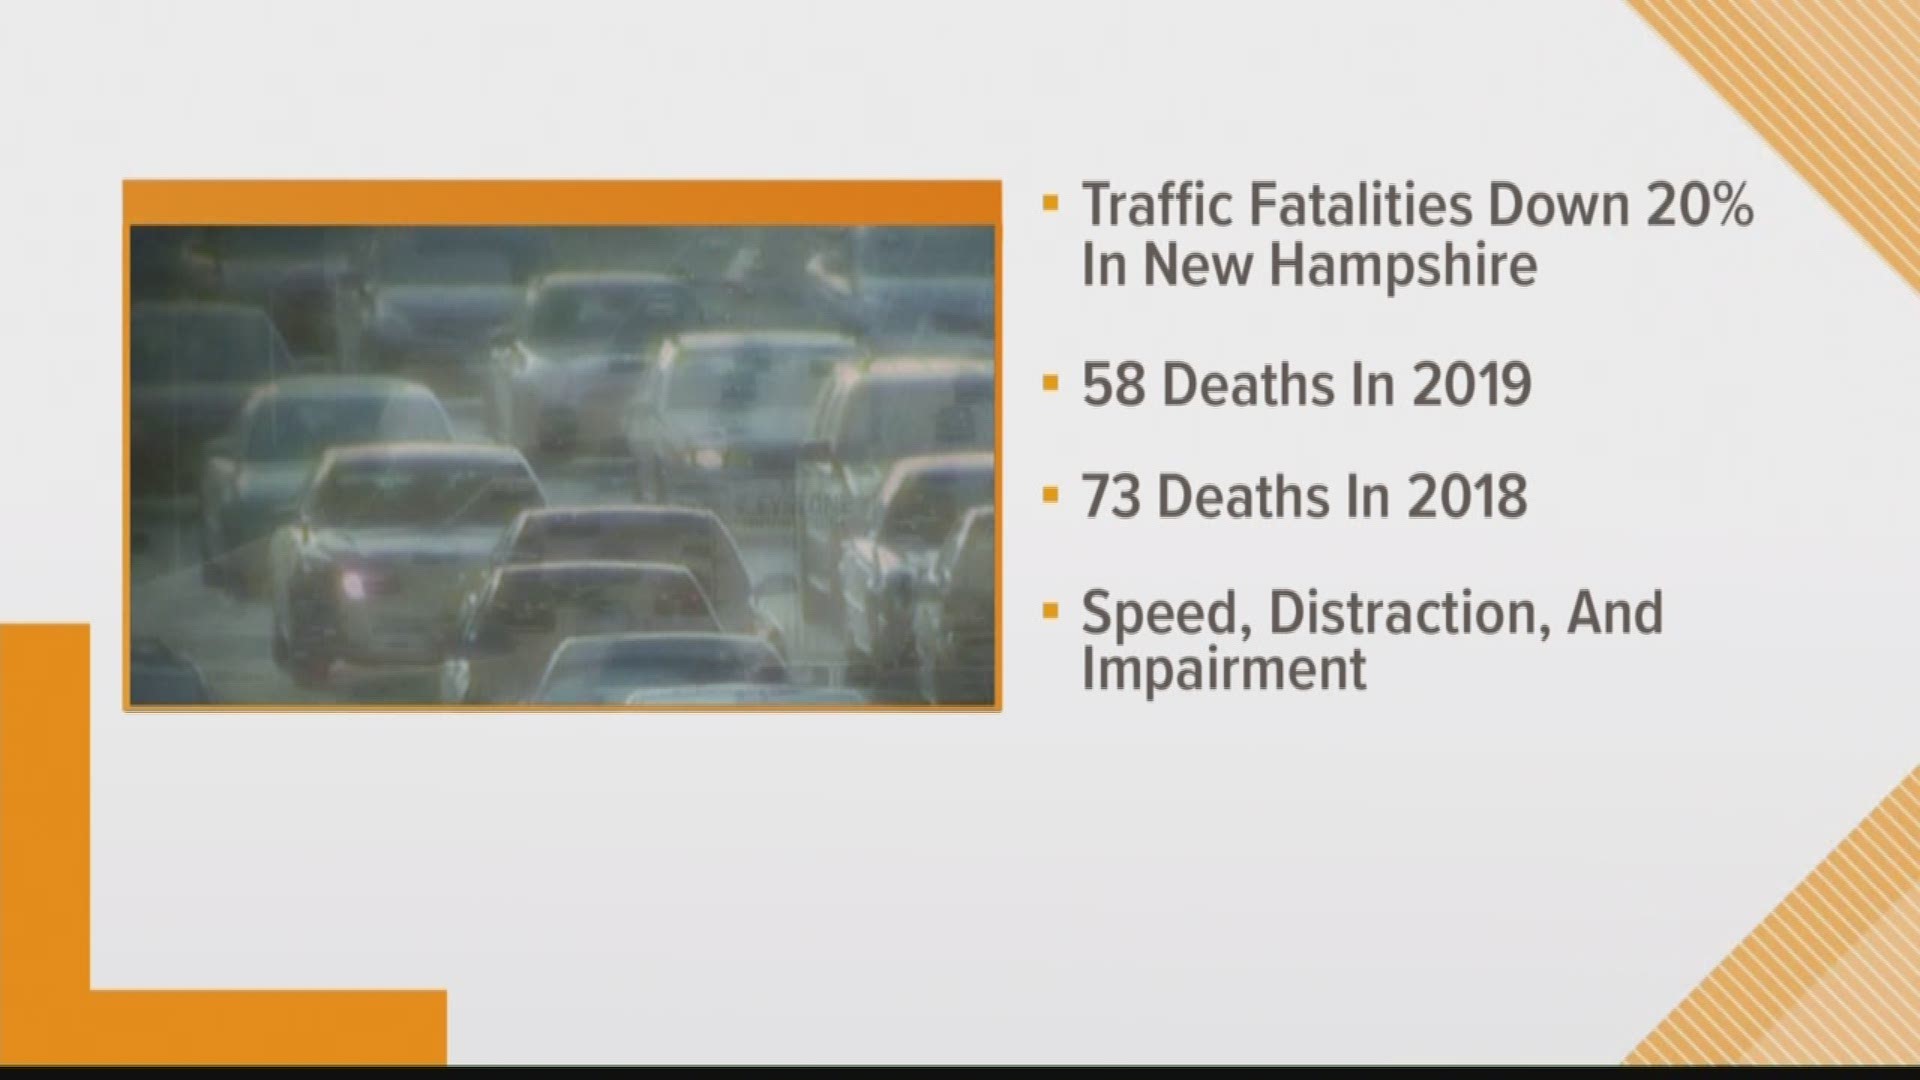 New Hampshire traffic deaths are down 20% from this time last year. There have been 58 people killed in 2019 compared to 73 in 2018.